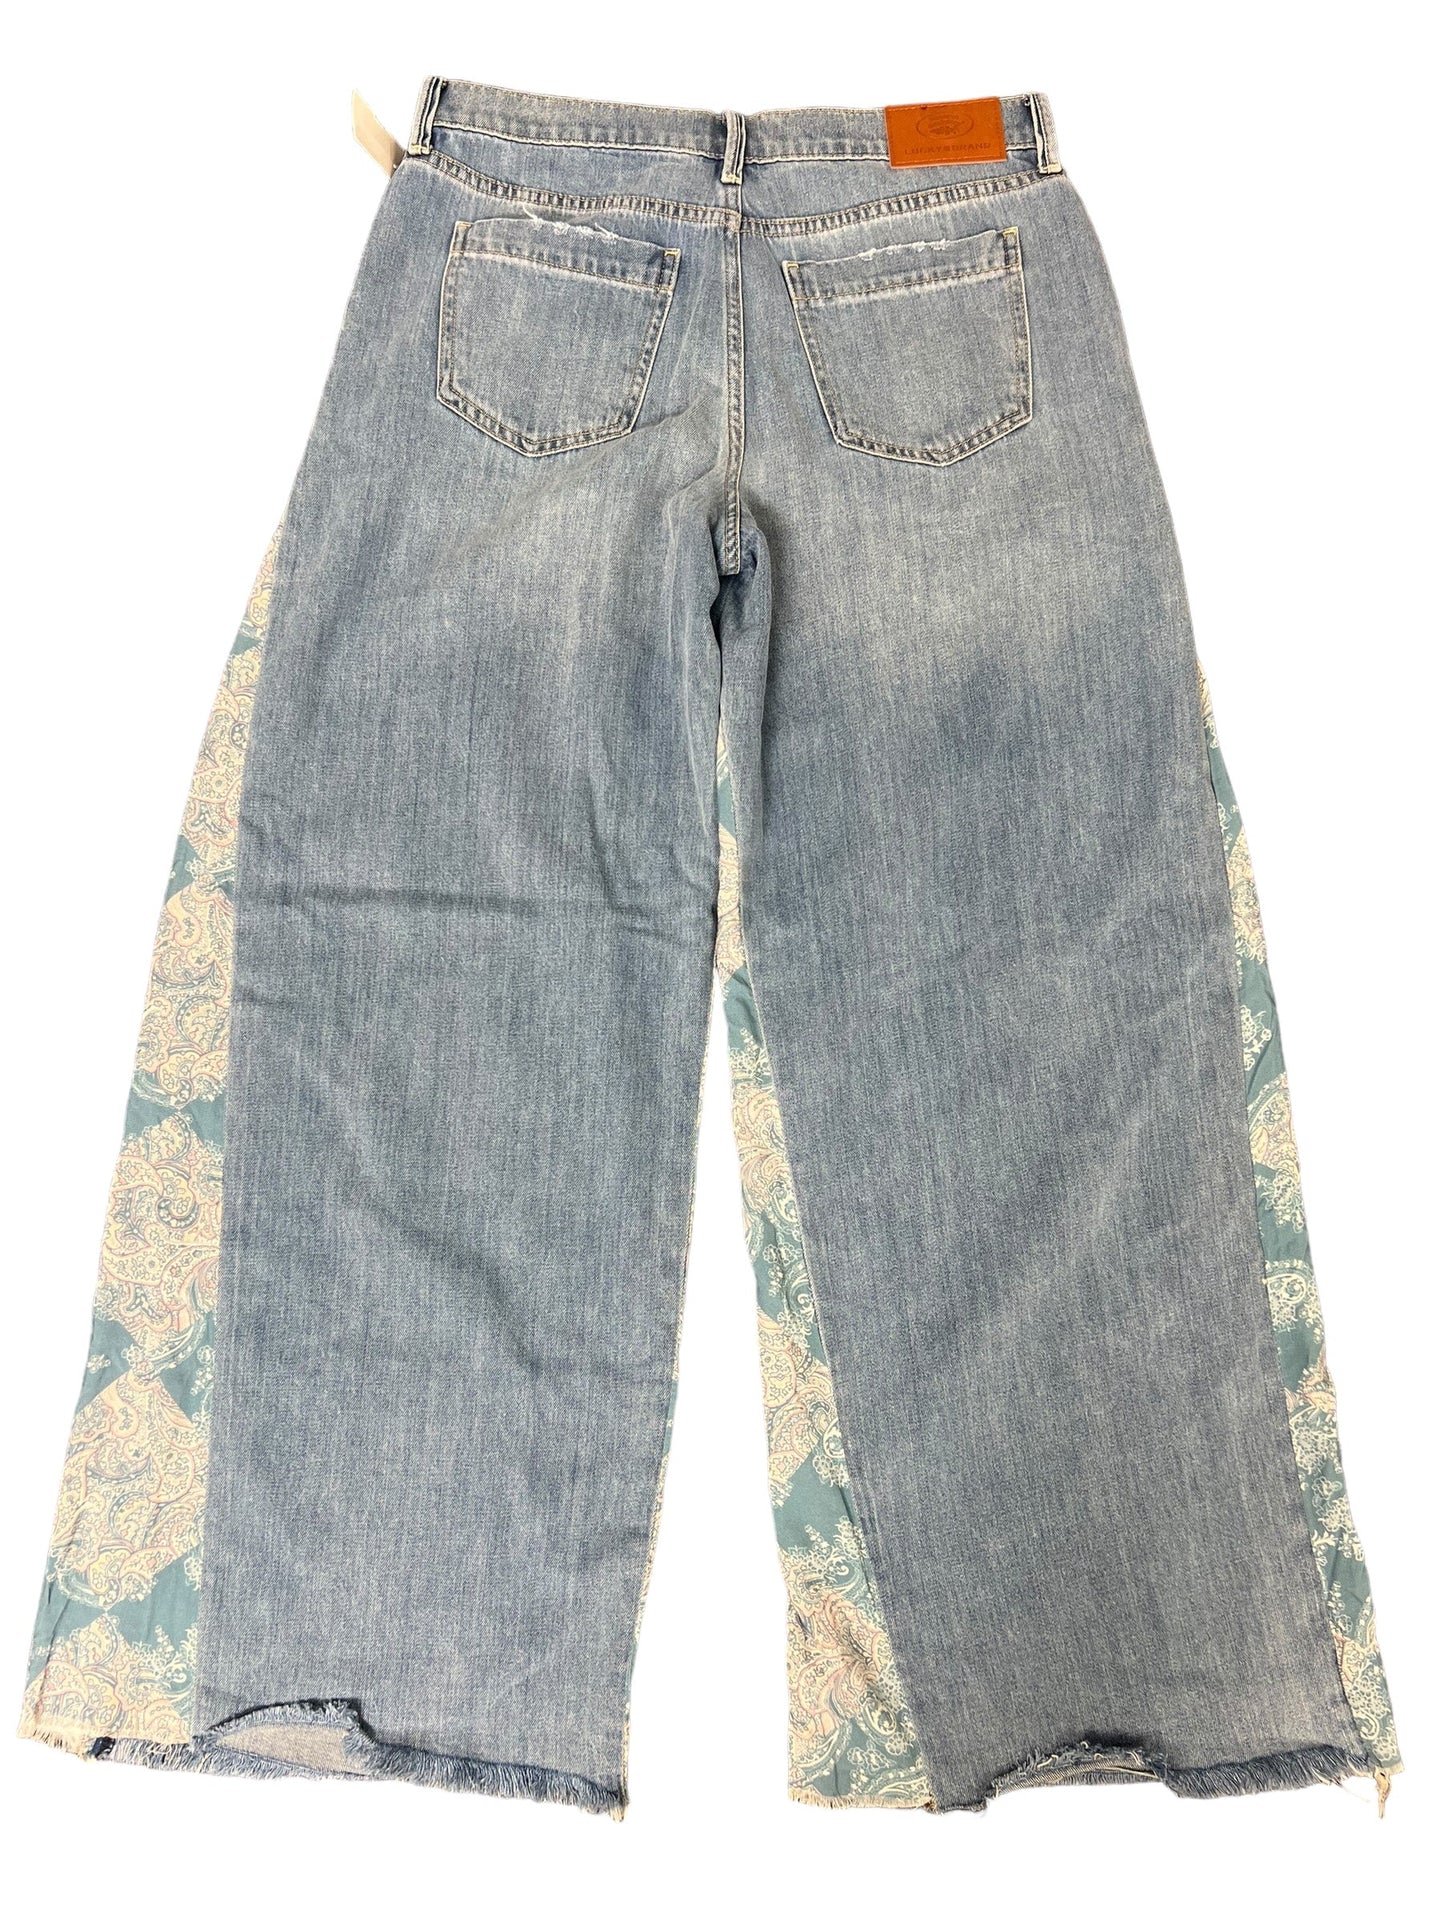 Blue Denim Jeans Flared Lucky Brand, Size 8